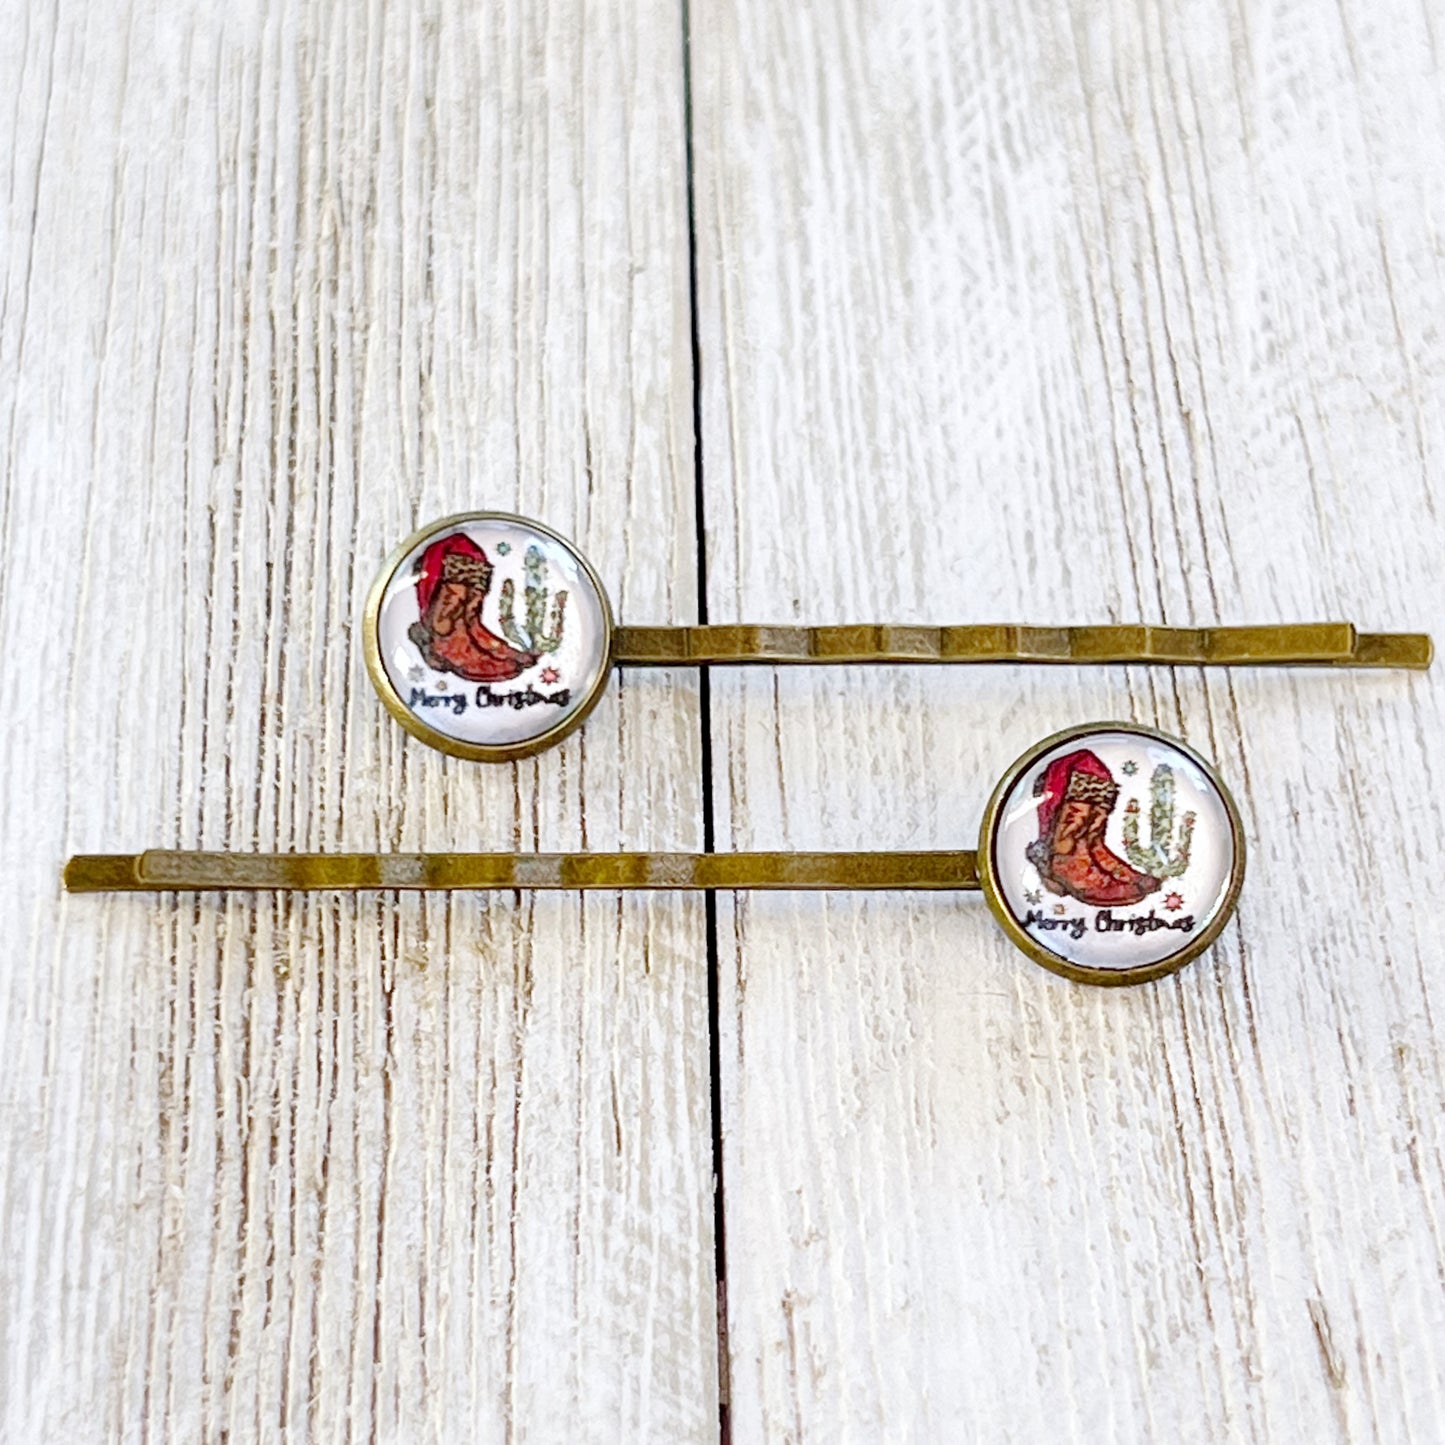 Cowboy Boots & Cactus Christmas Hair Pins - Festive Western-Inspired Accessories